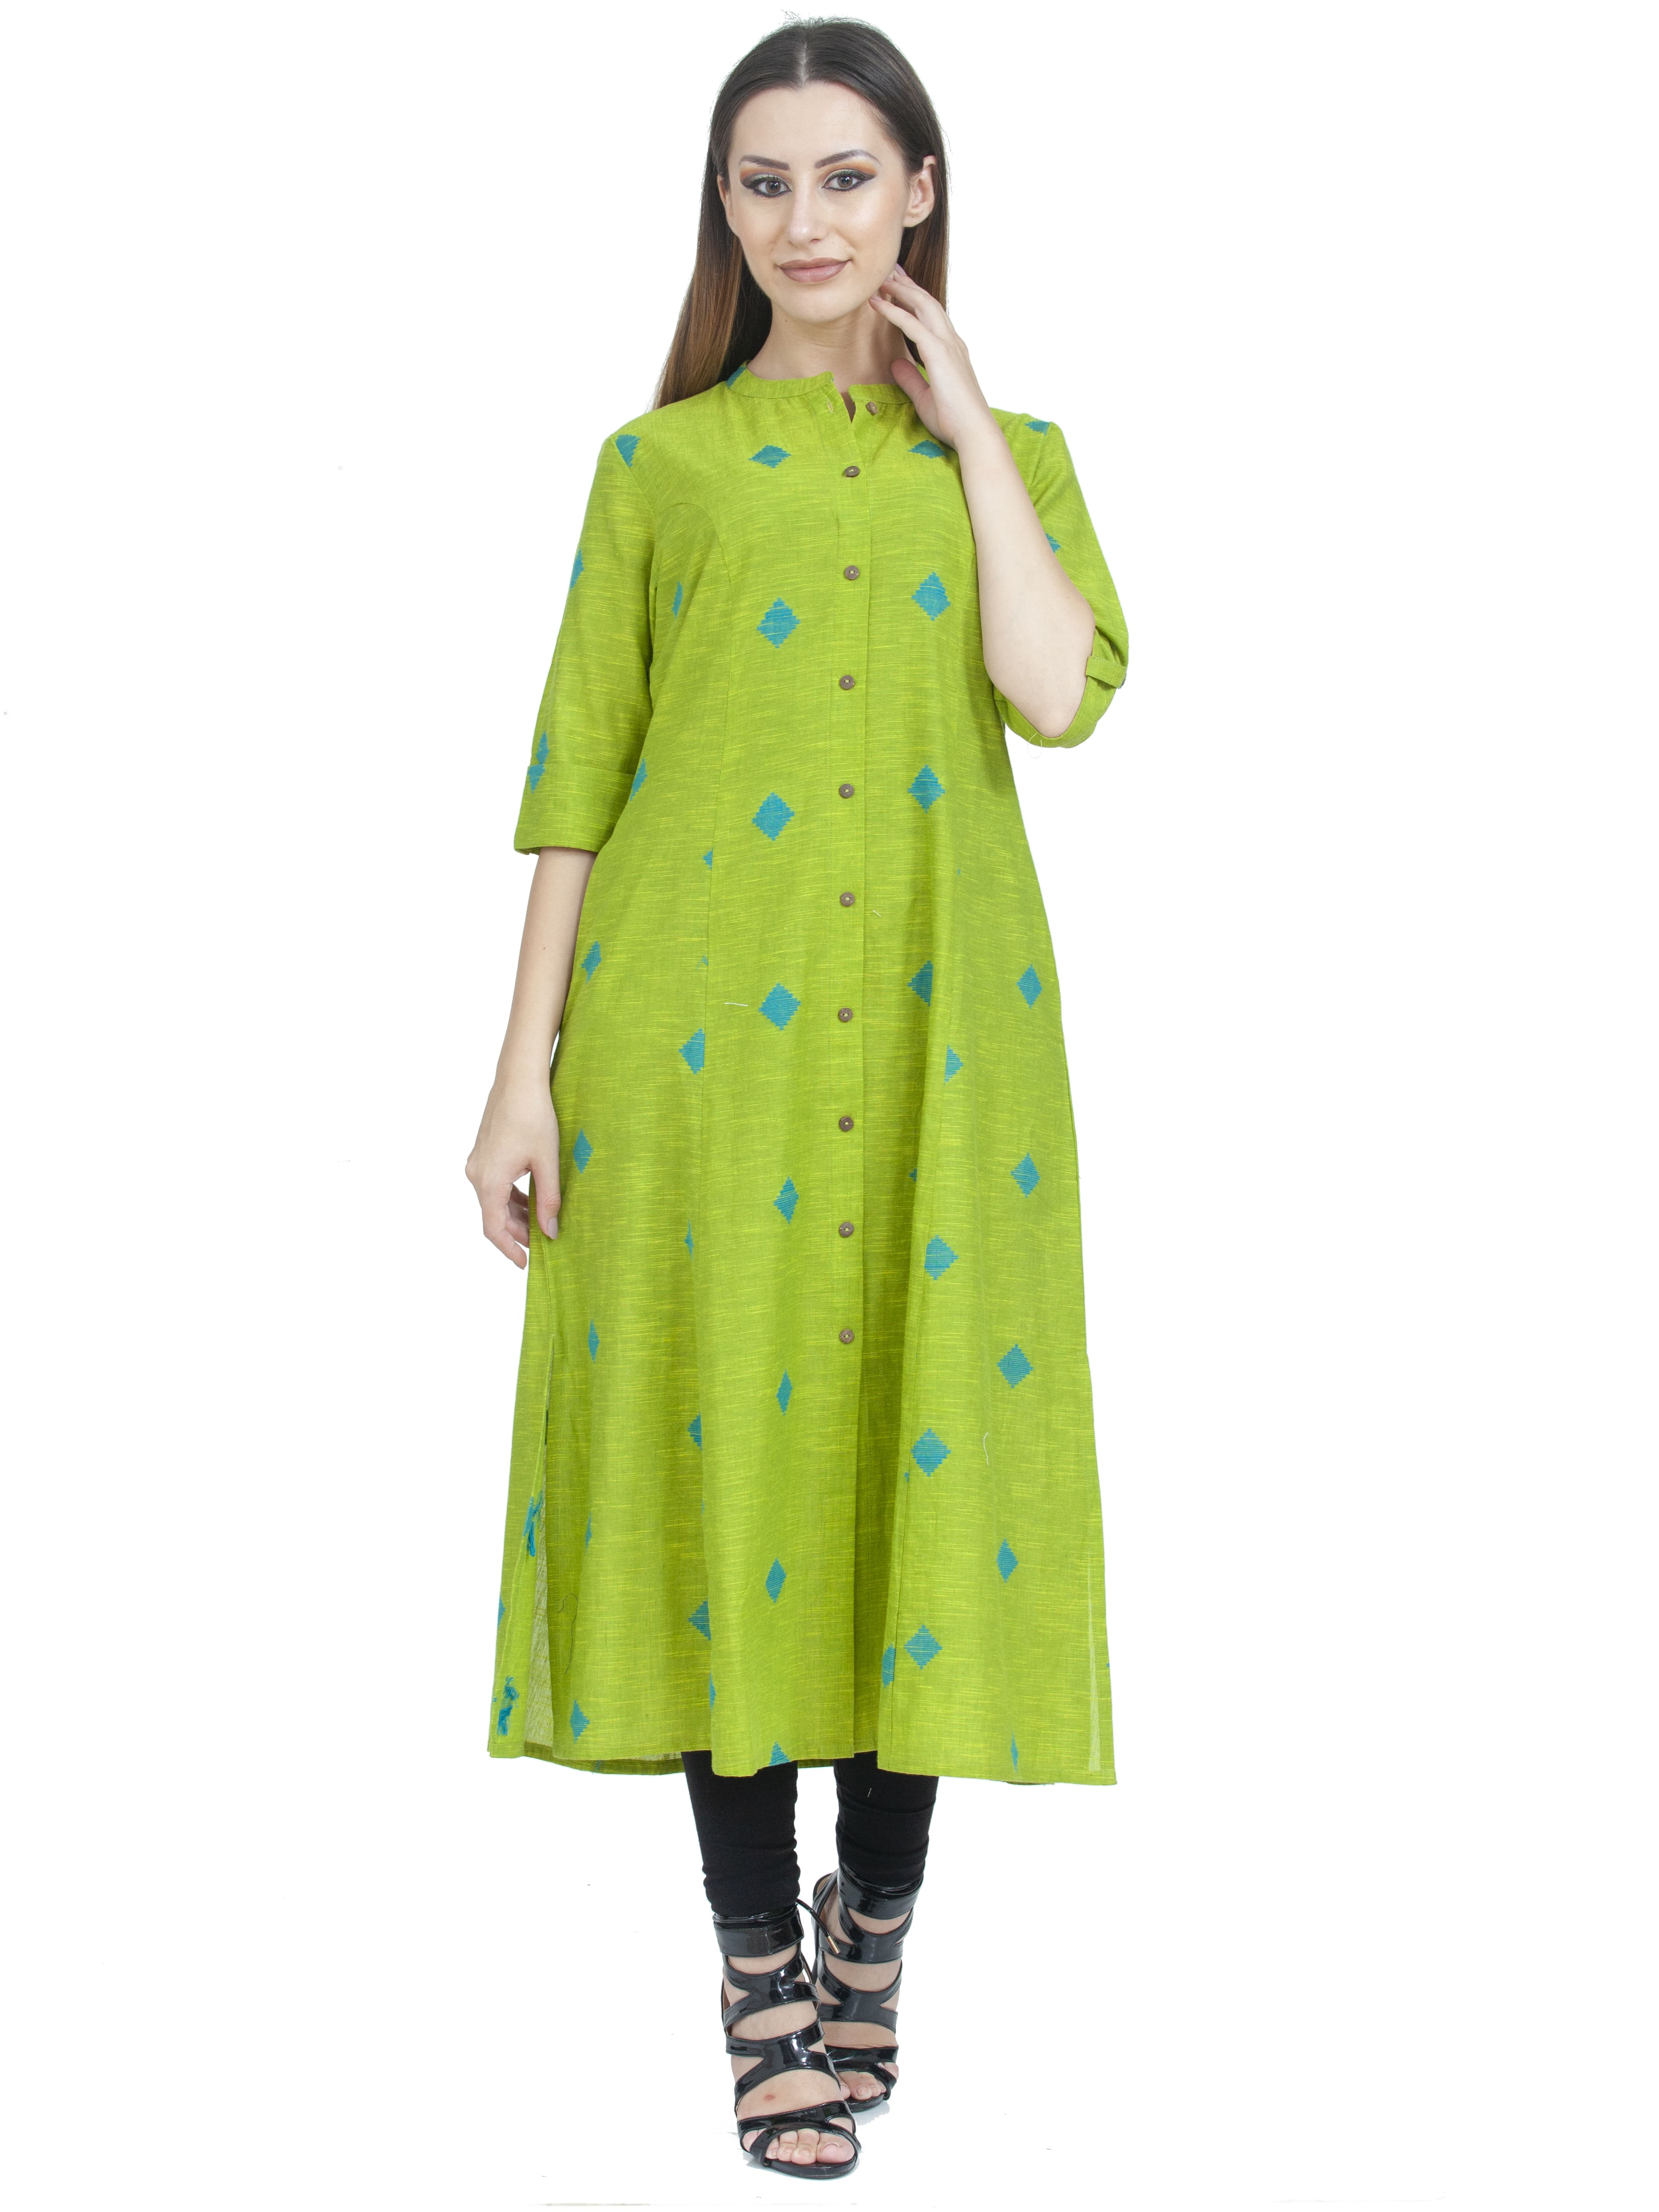 Custom Clothing Manufacturers in India